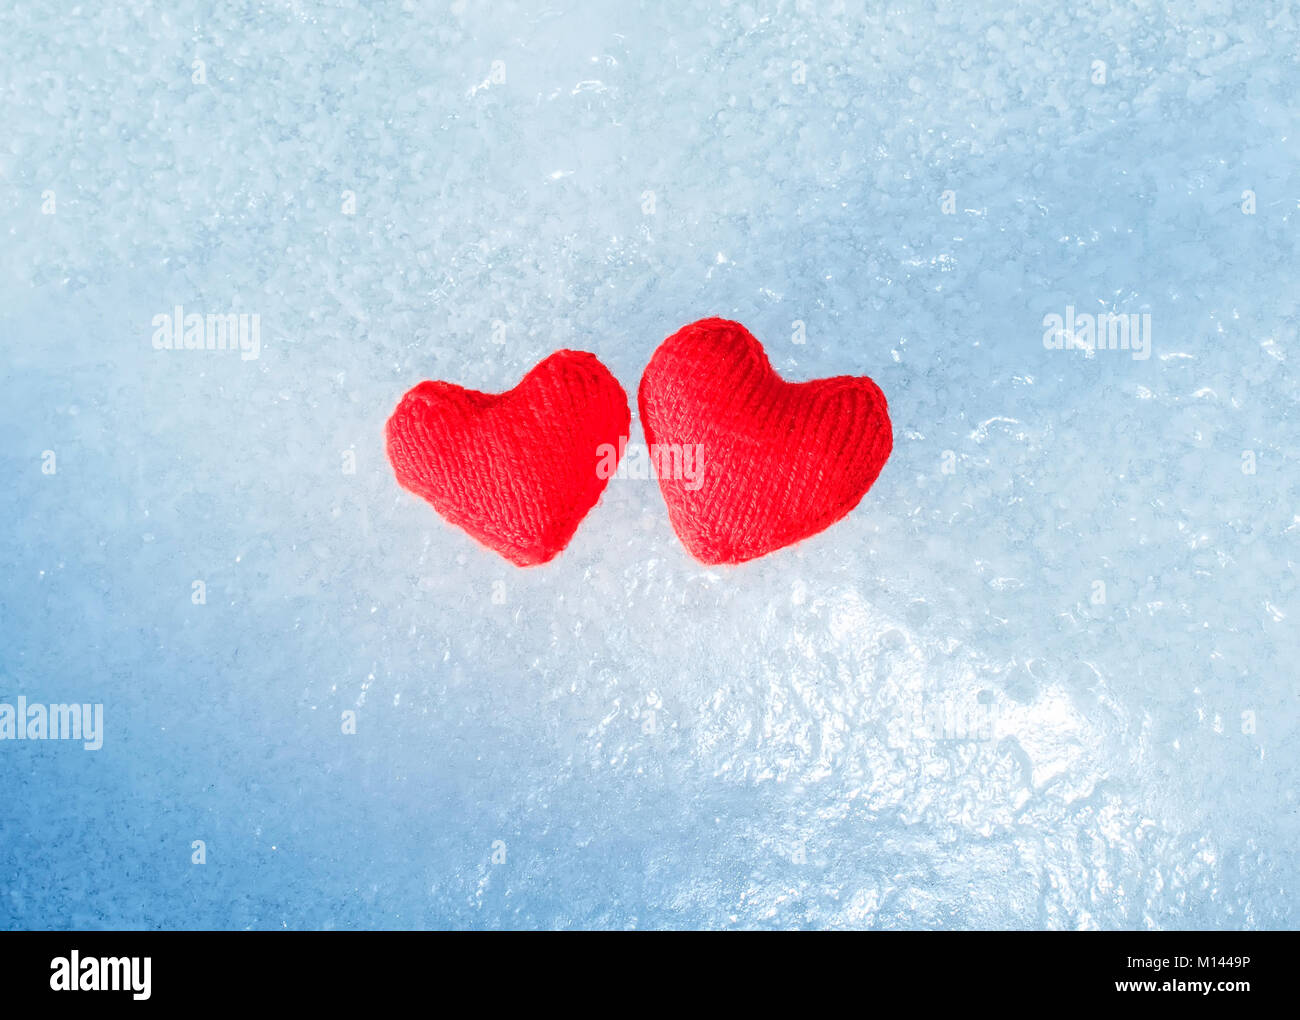 two bright red hot heart made of yarn lying on the cold transparent blue ice Stock Photo